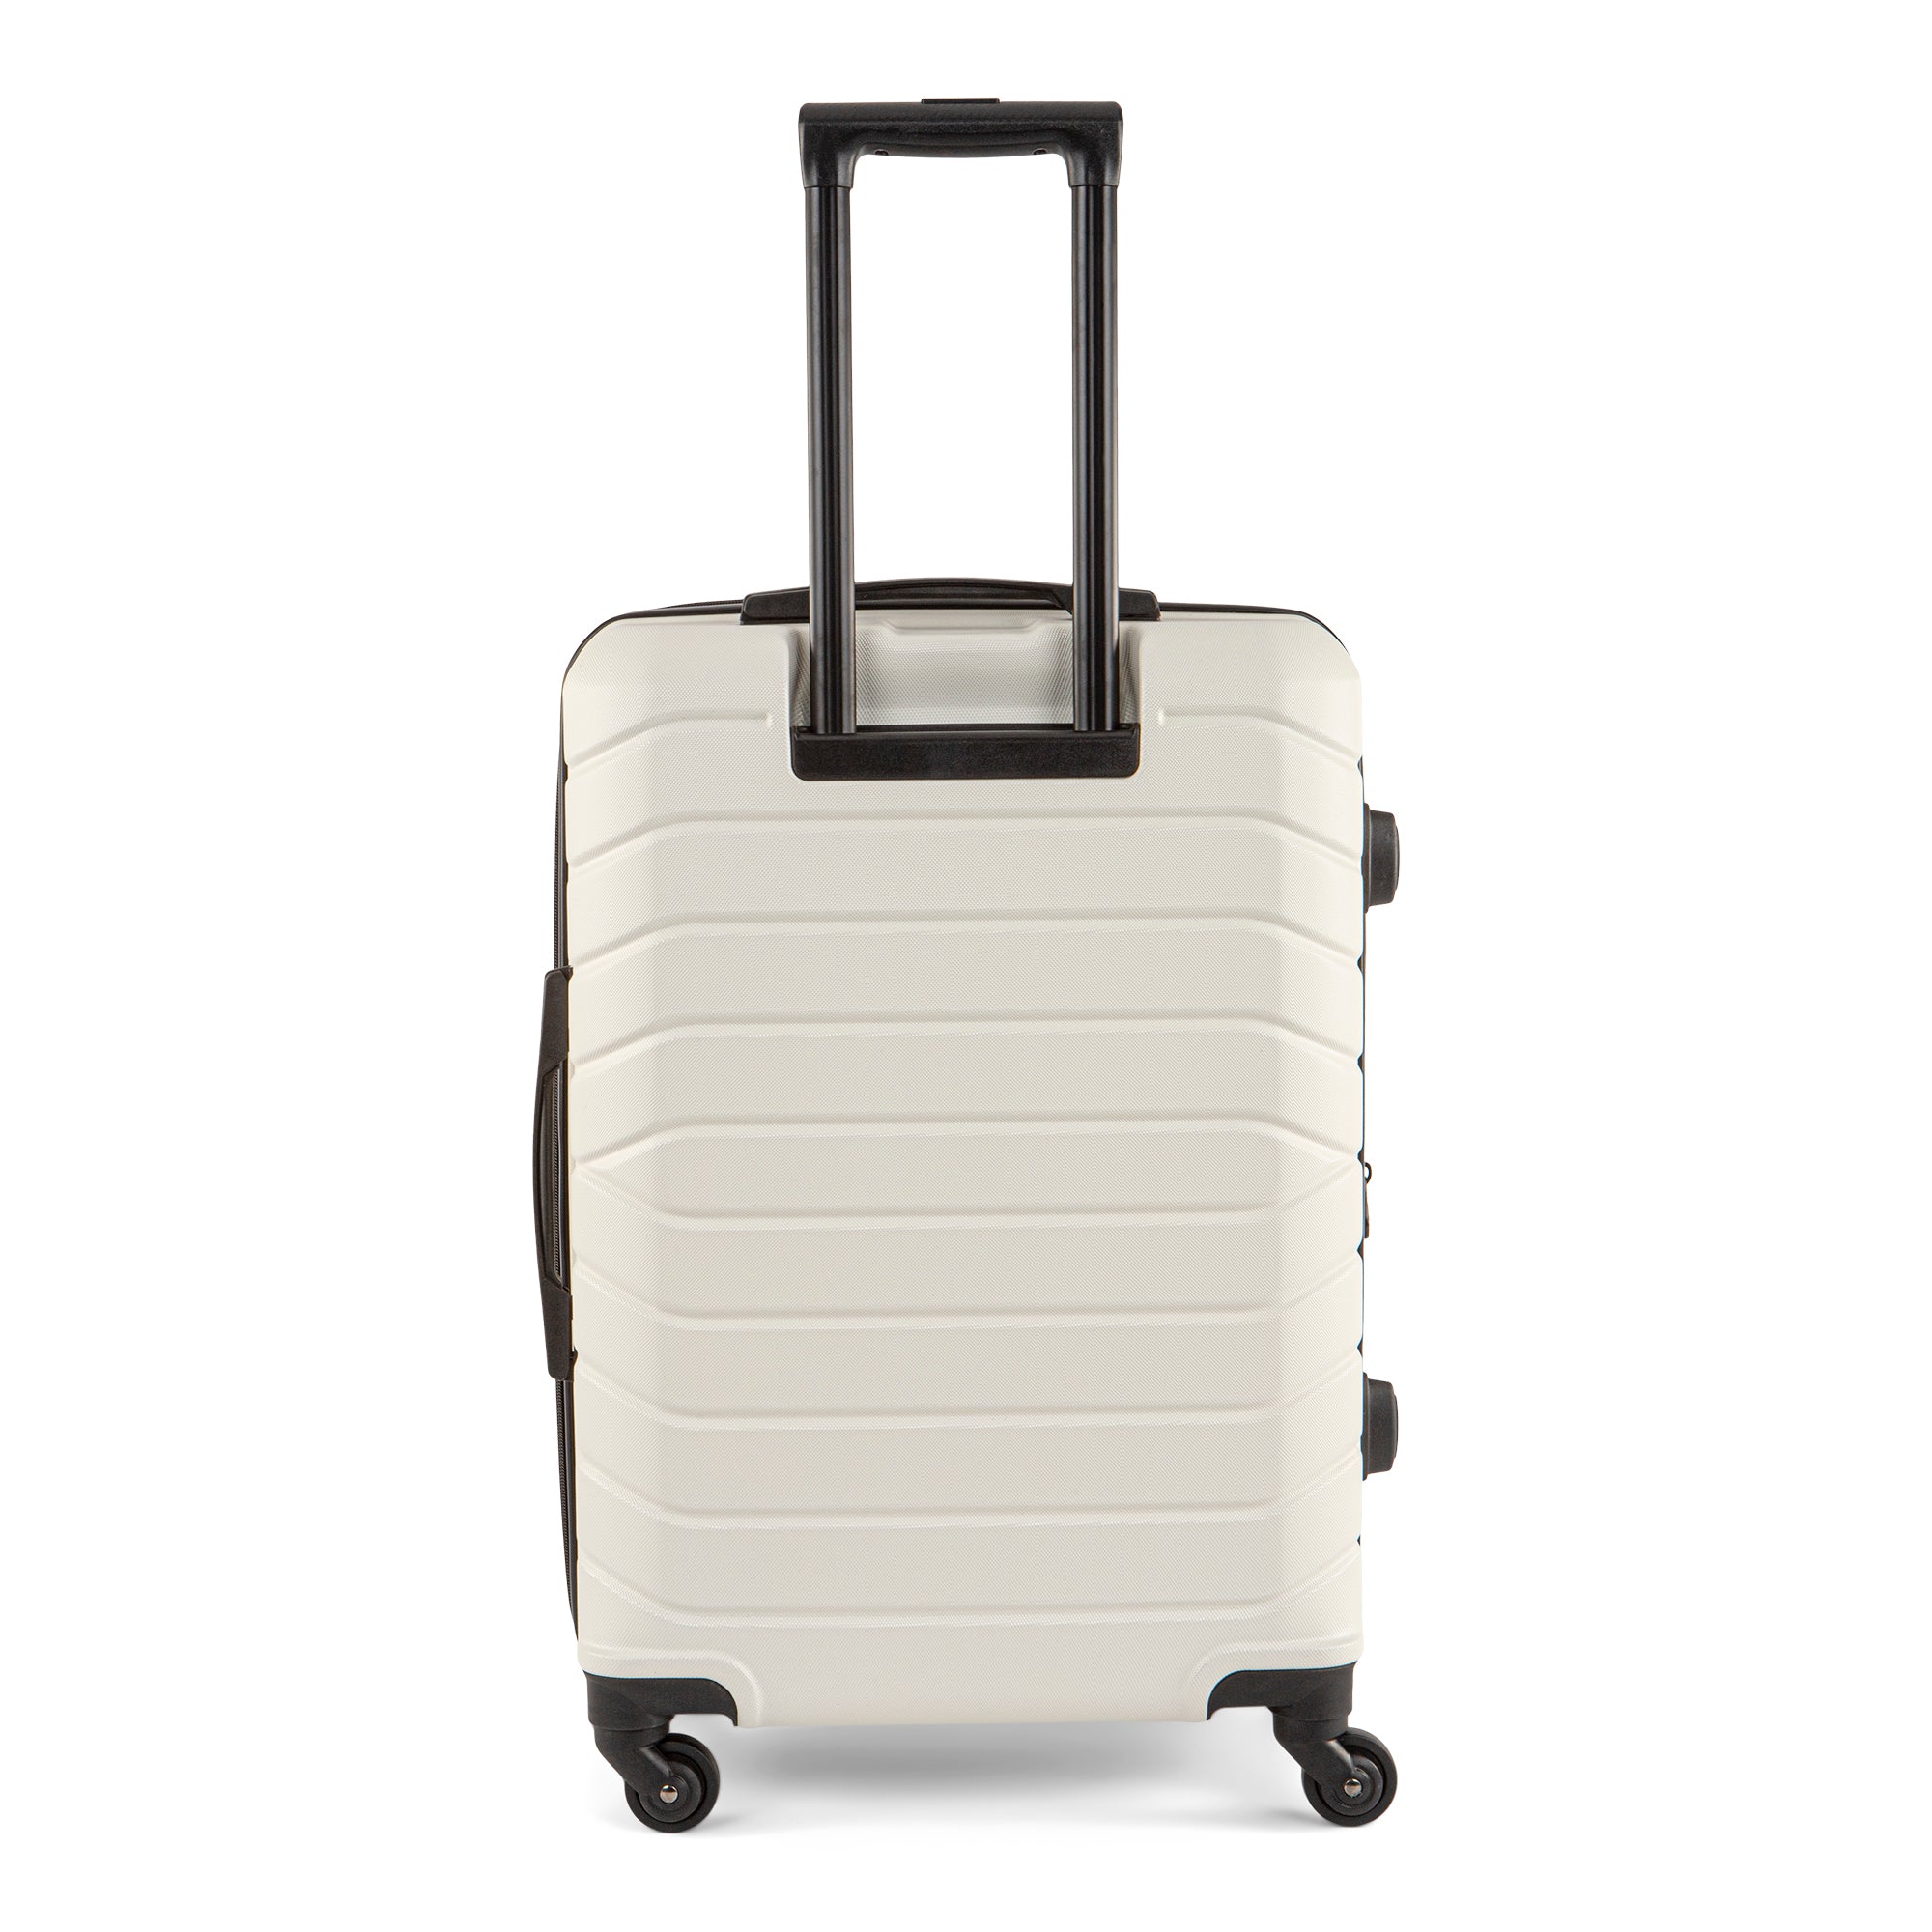 Swiss Mobility CDG Collection 24" Hard Case Luggage